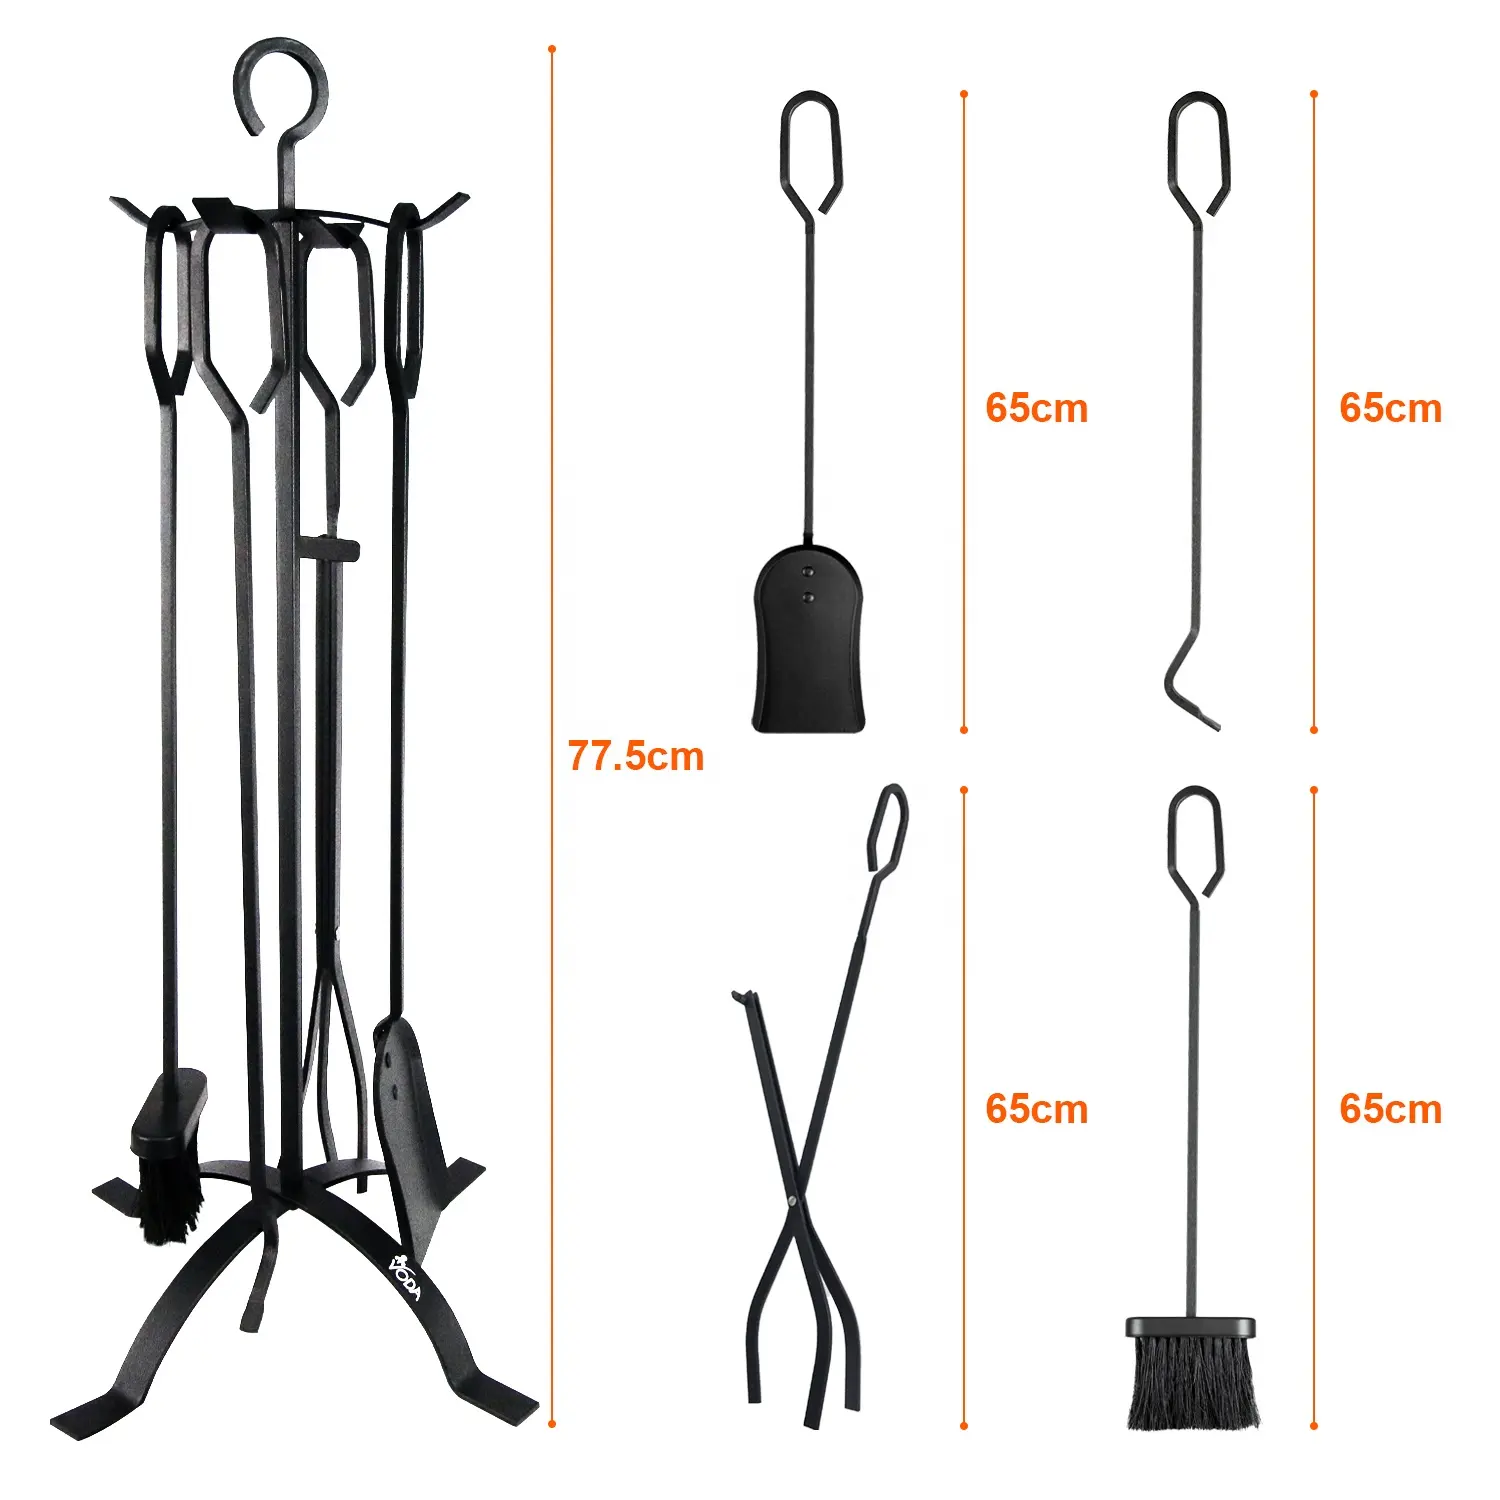 VODA 5PCS Heating Cast Wrought Iron Fireplace Accessories Fireplace Tool Sets